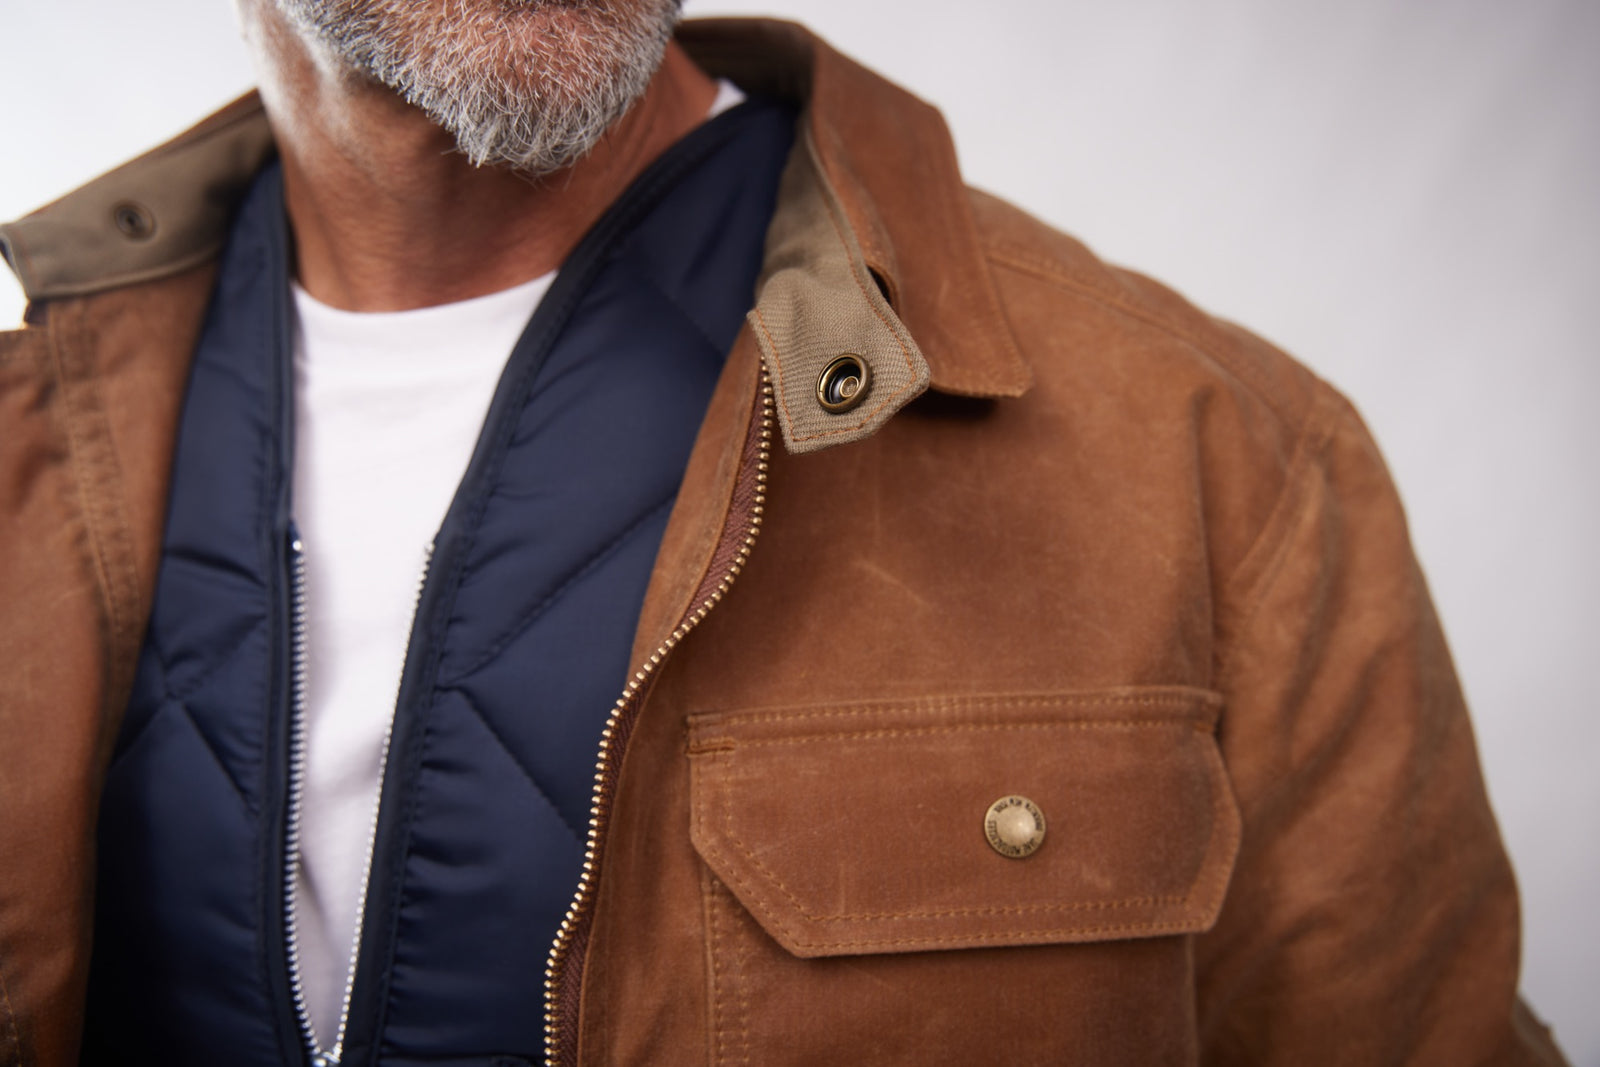 Jane Motorcycles The Driggs Riding Jacket - Waxed Canvas Field Tan -  Franklin & Poe